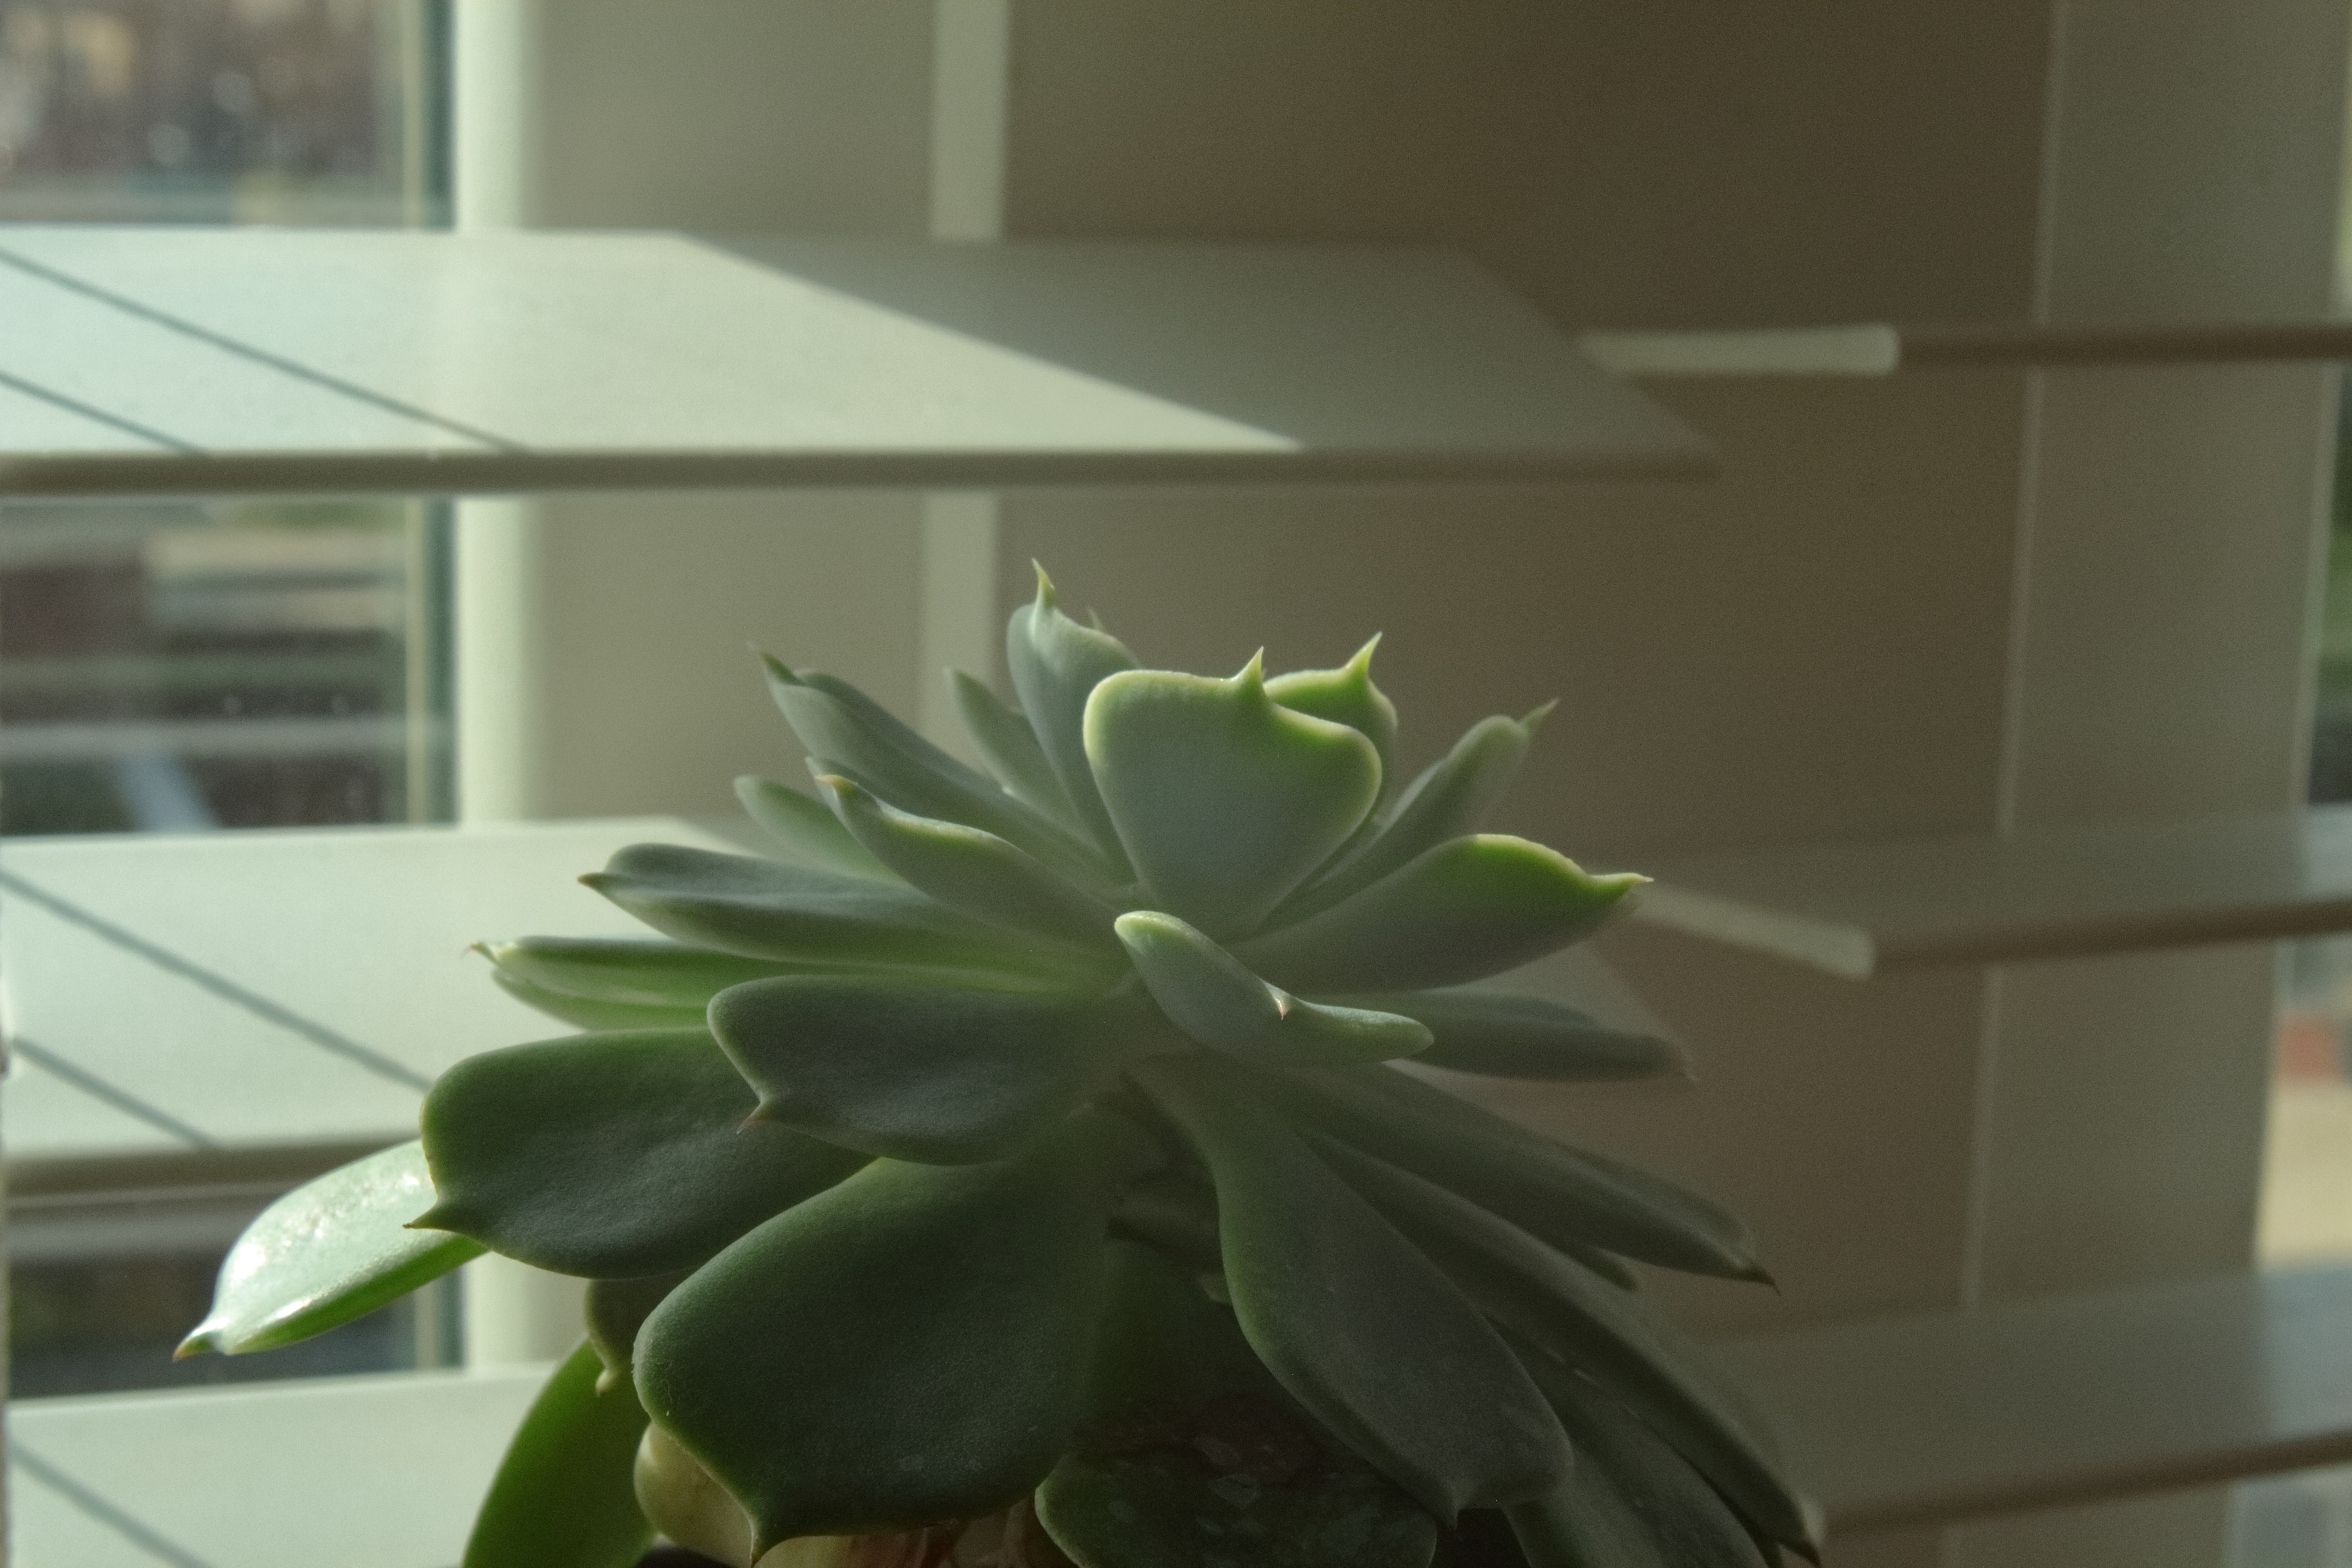 A very nice picture of a succulent.